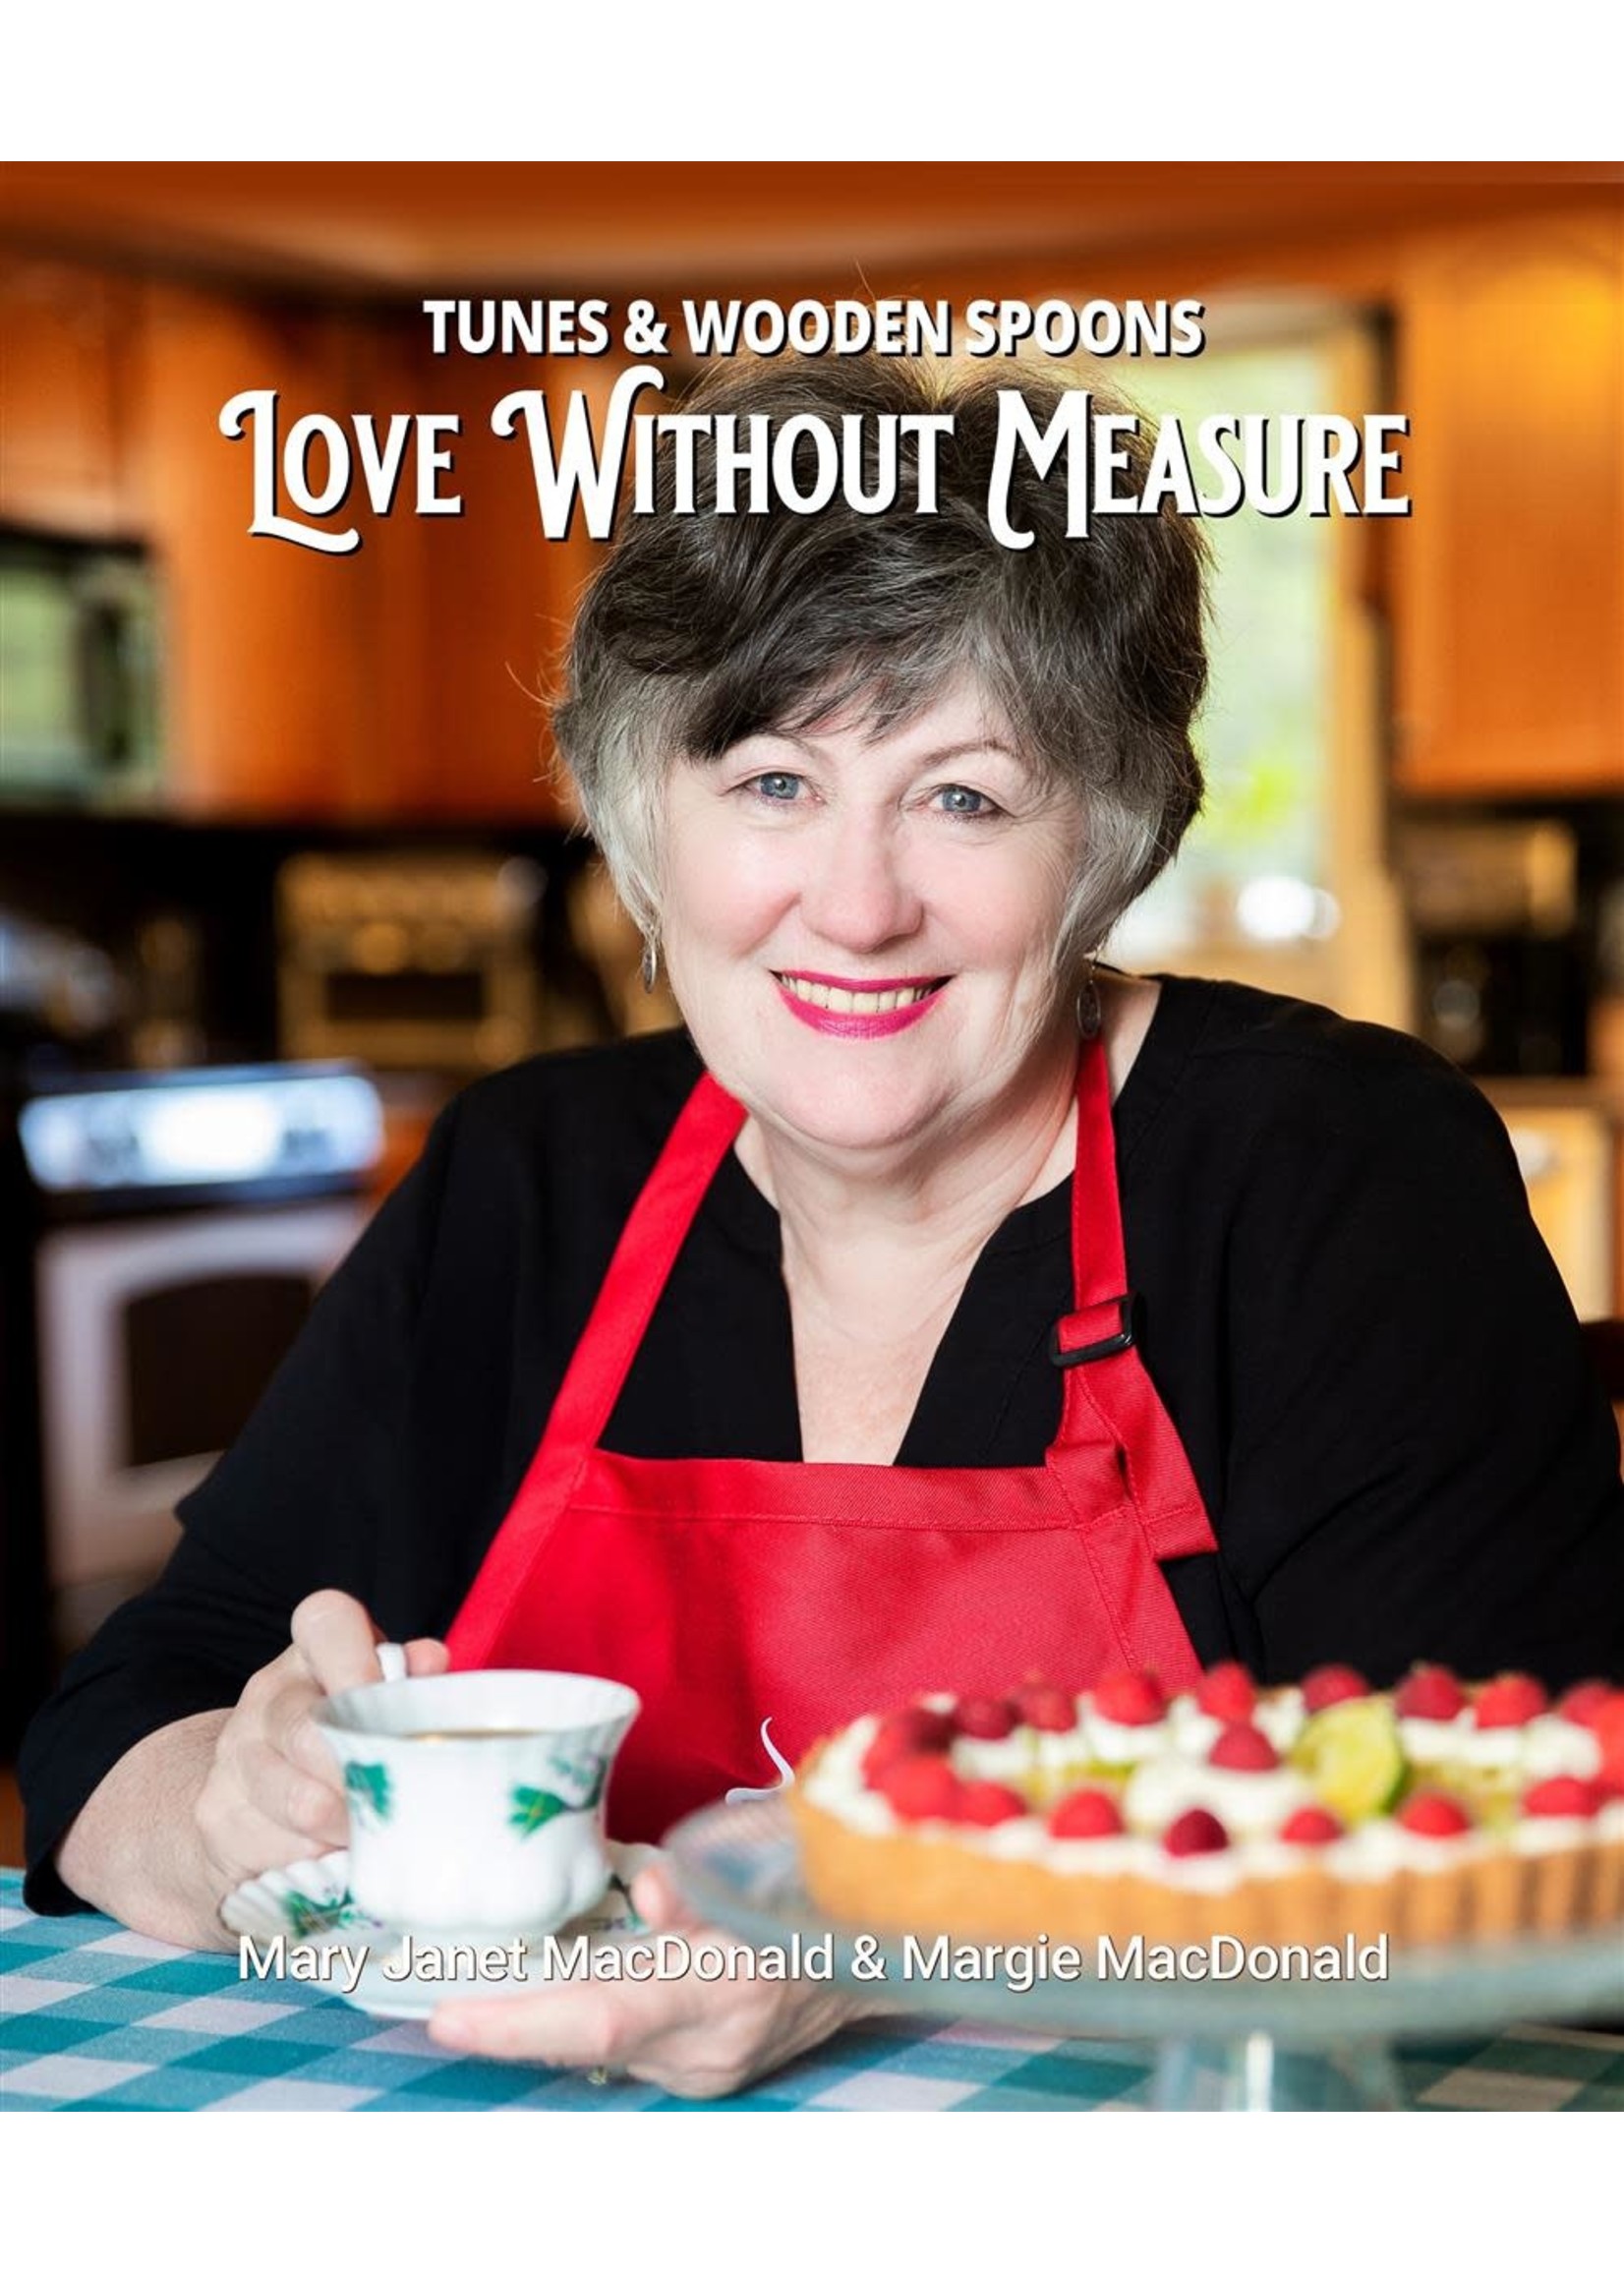 Tunes and Wooden Spoons: Love Without Measure by Mary Janet MacDonald